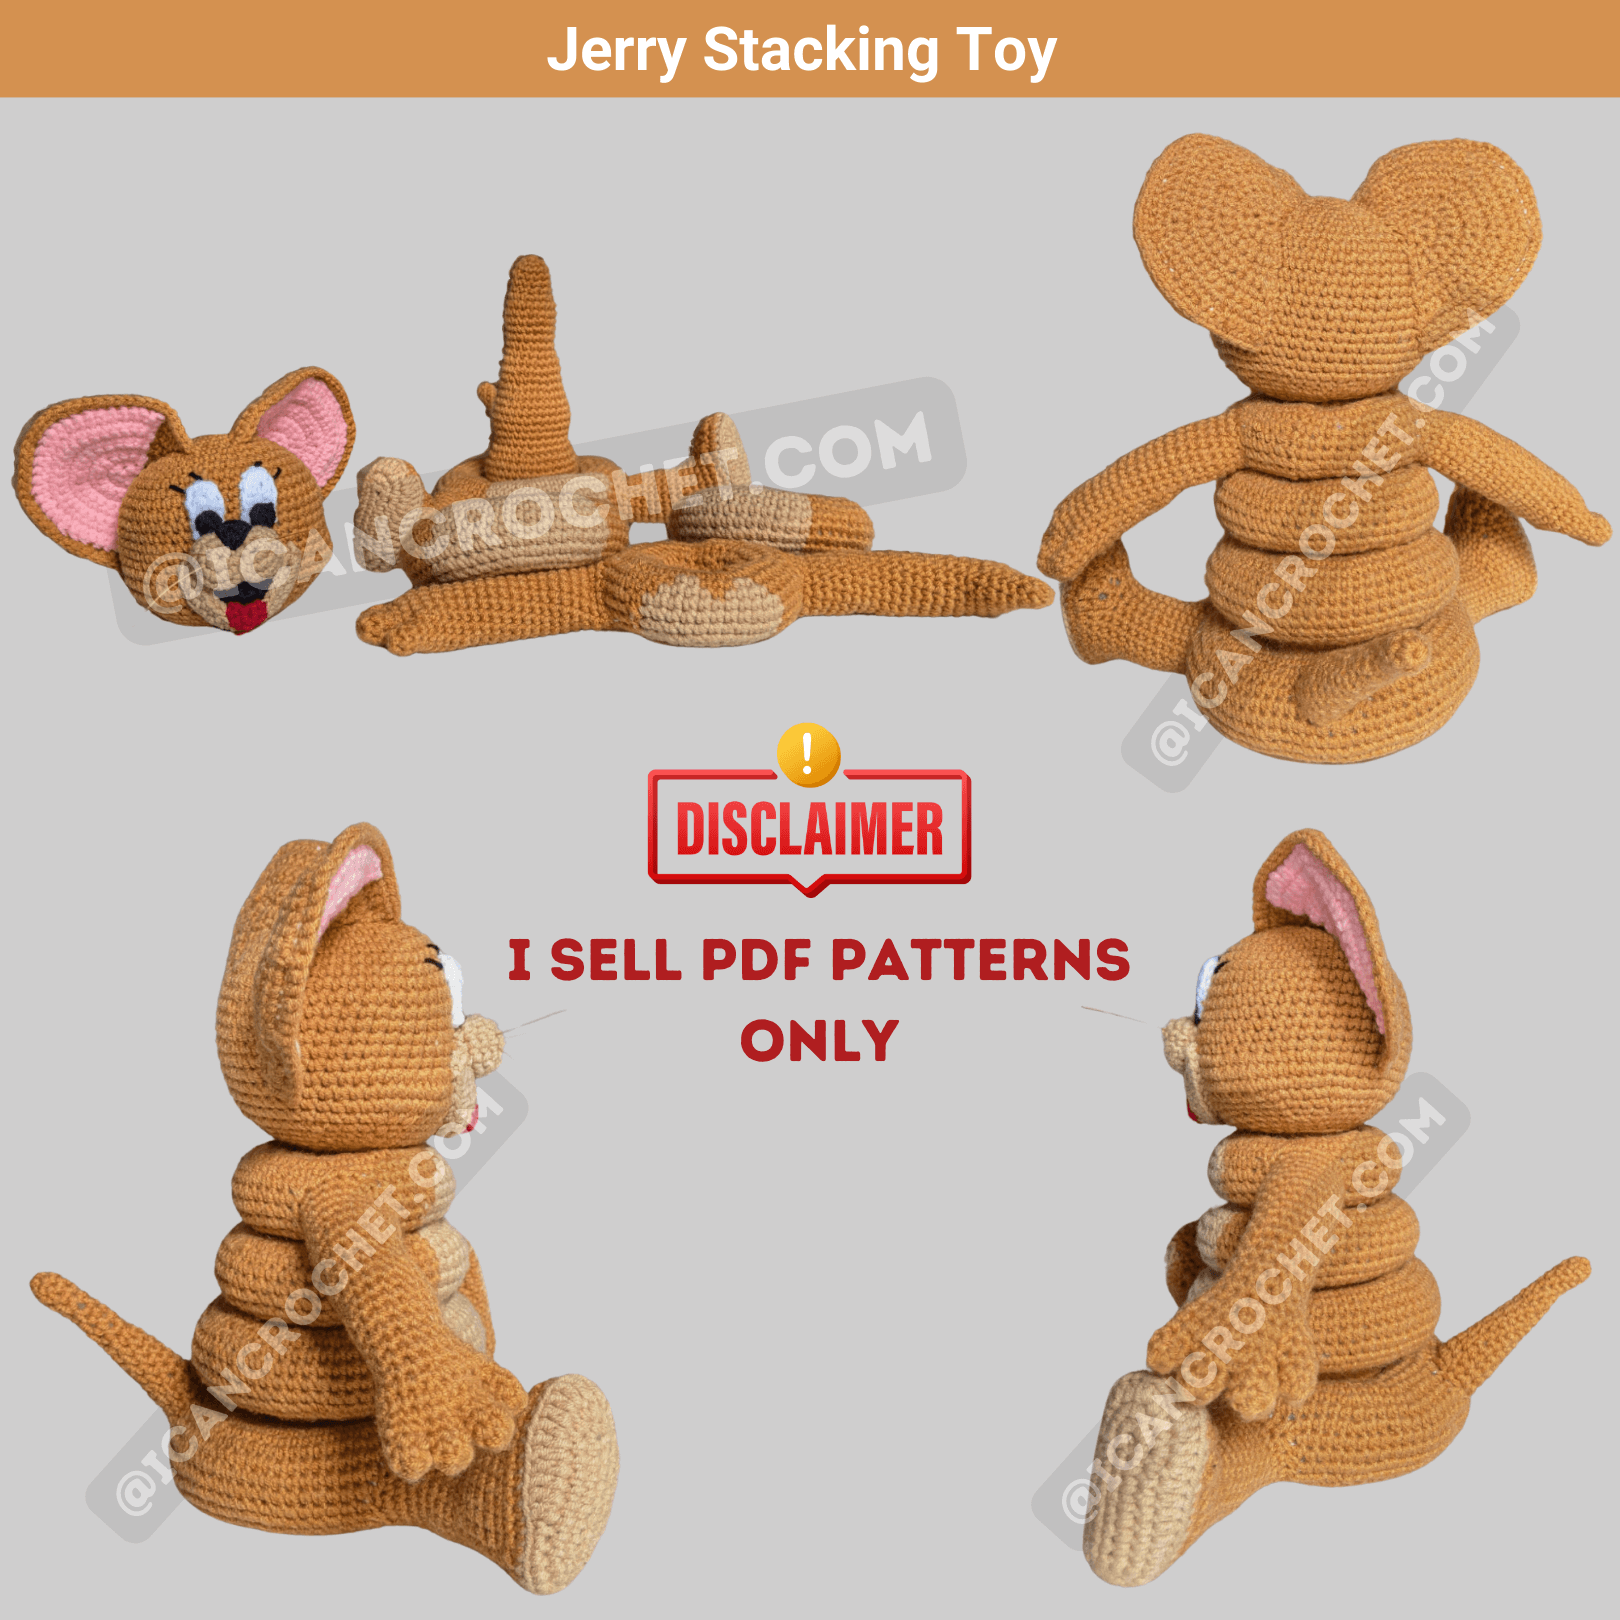 Jerry stacking toy crochet pattern